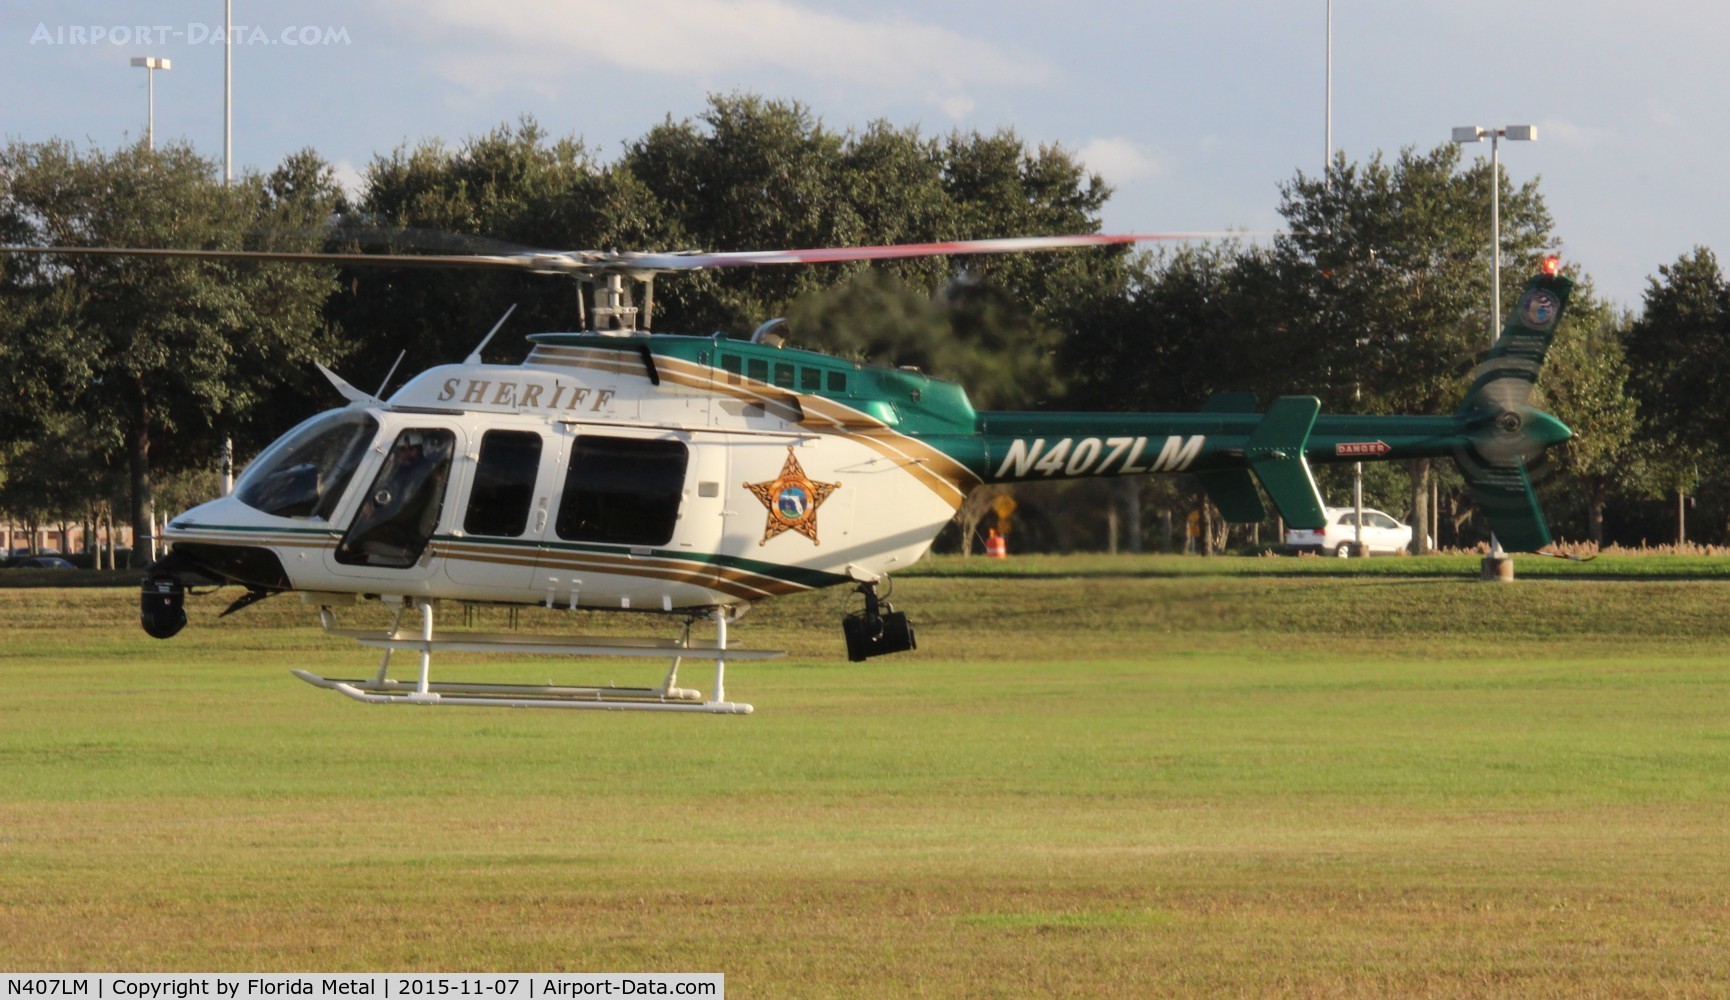 N407LM, 2007 Bell 407 C/N 53767, Orange County Sheriff Bell 407 at American Heroes Air Show Oveido Mall Florida